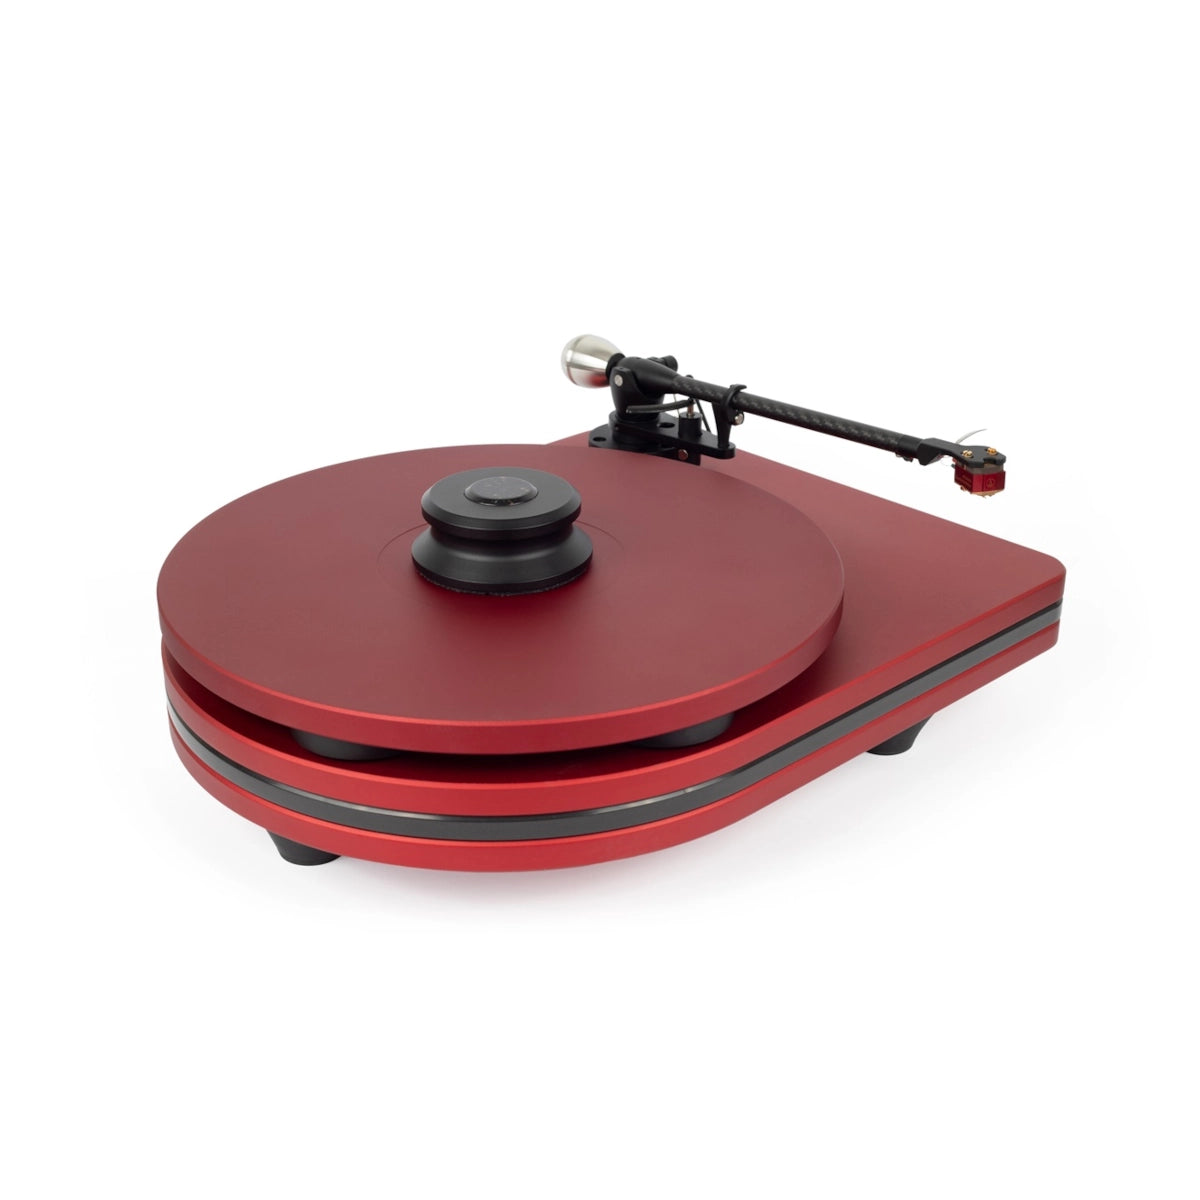 AURIS Bayadere 3 Turntable with W9 Tone Arm